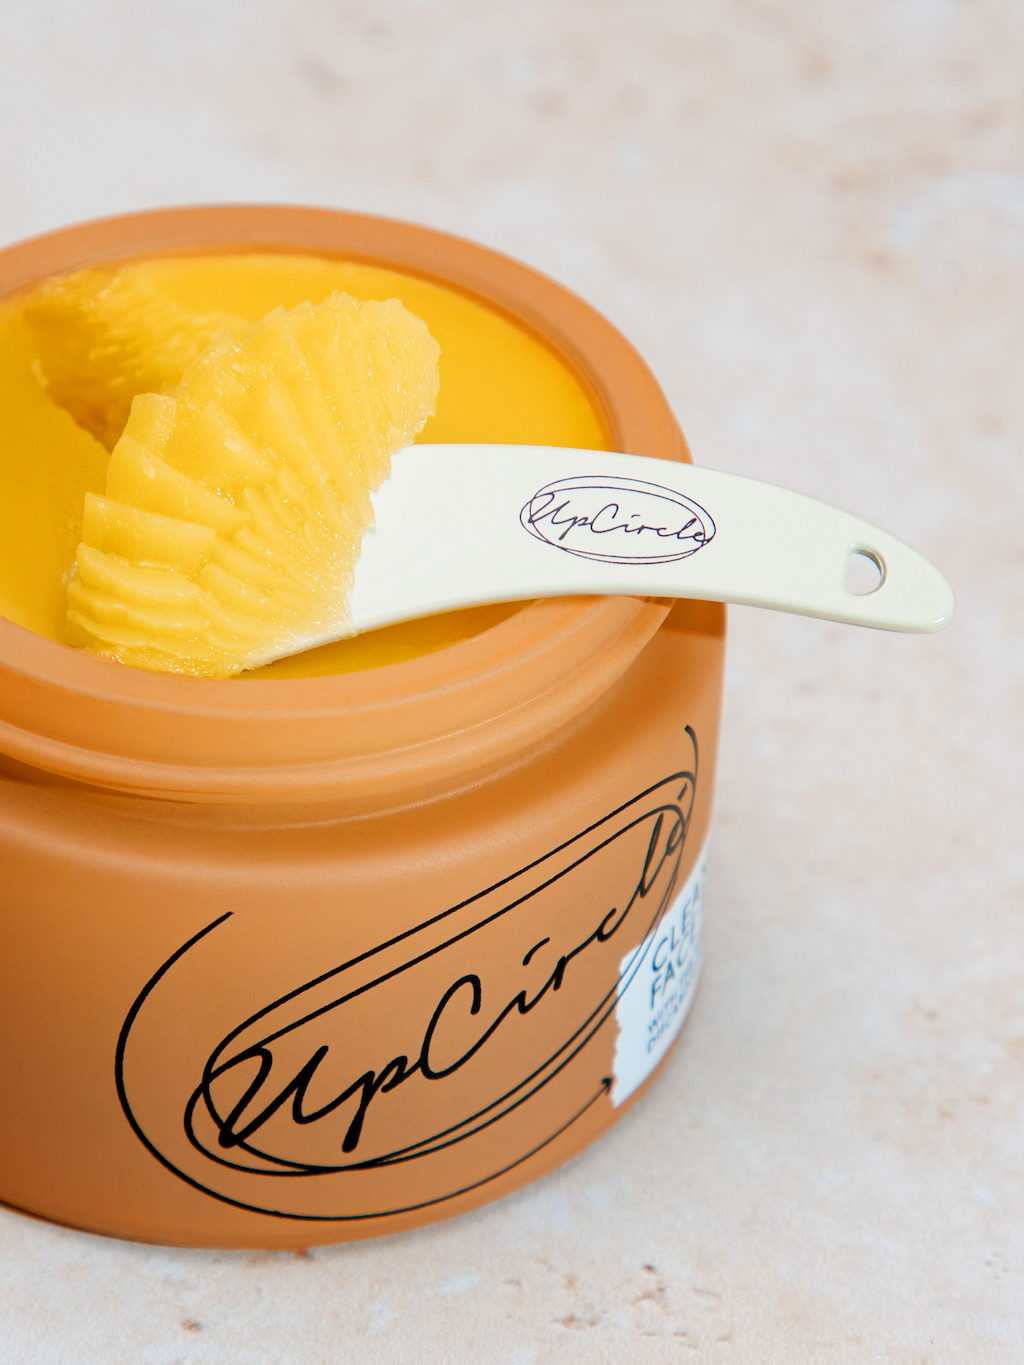 UpCircle Cleansing Face Balm. Sustainable skincare. The orange glass jar containing the balm is shown open from above, with a spatula and some scooped up product in it.